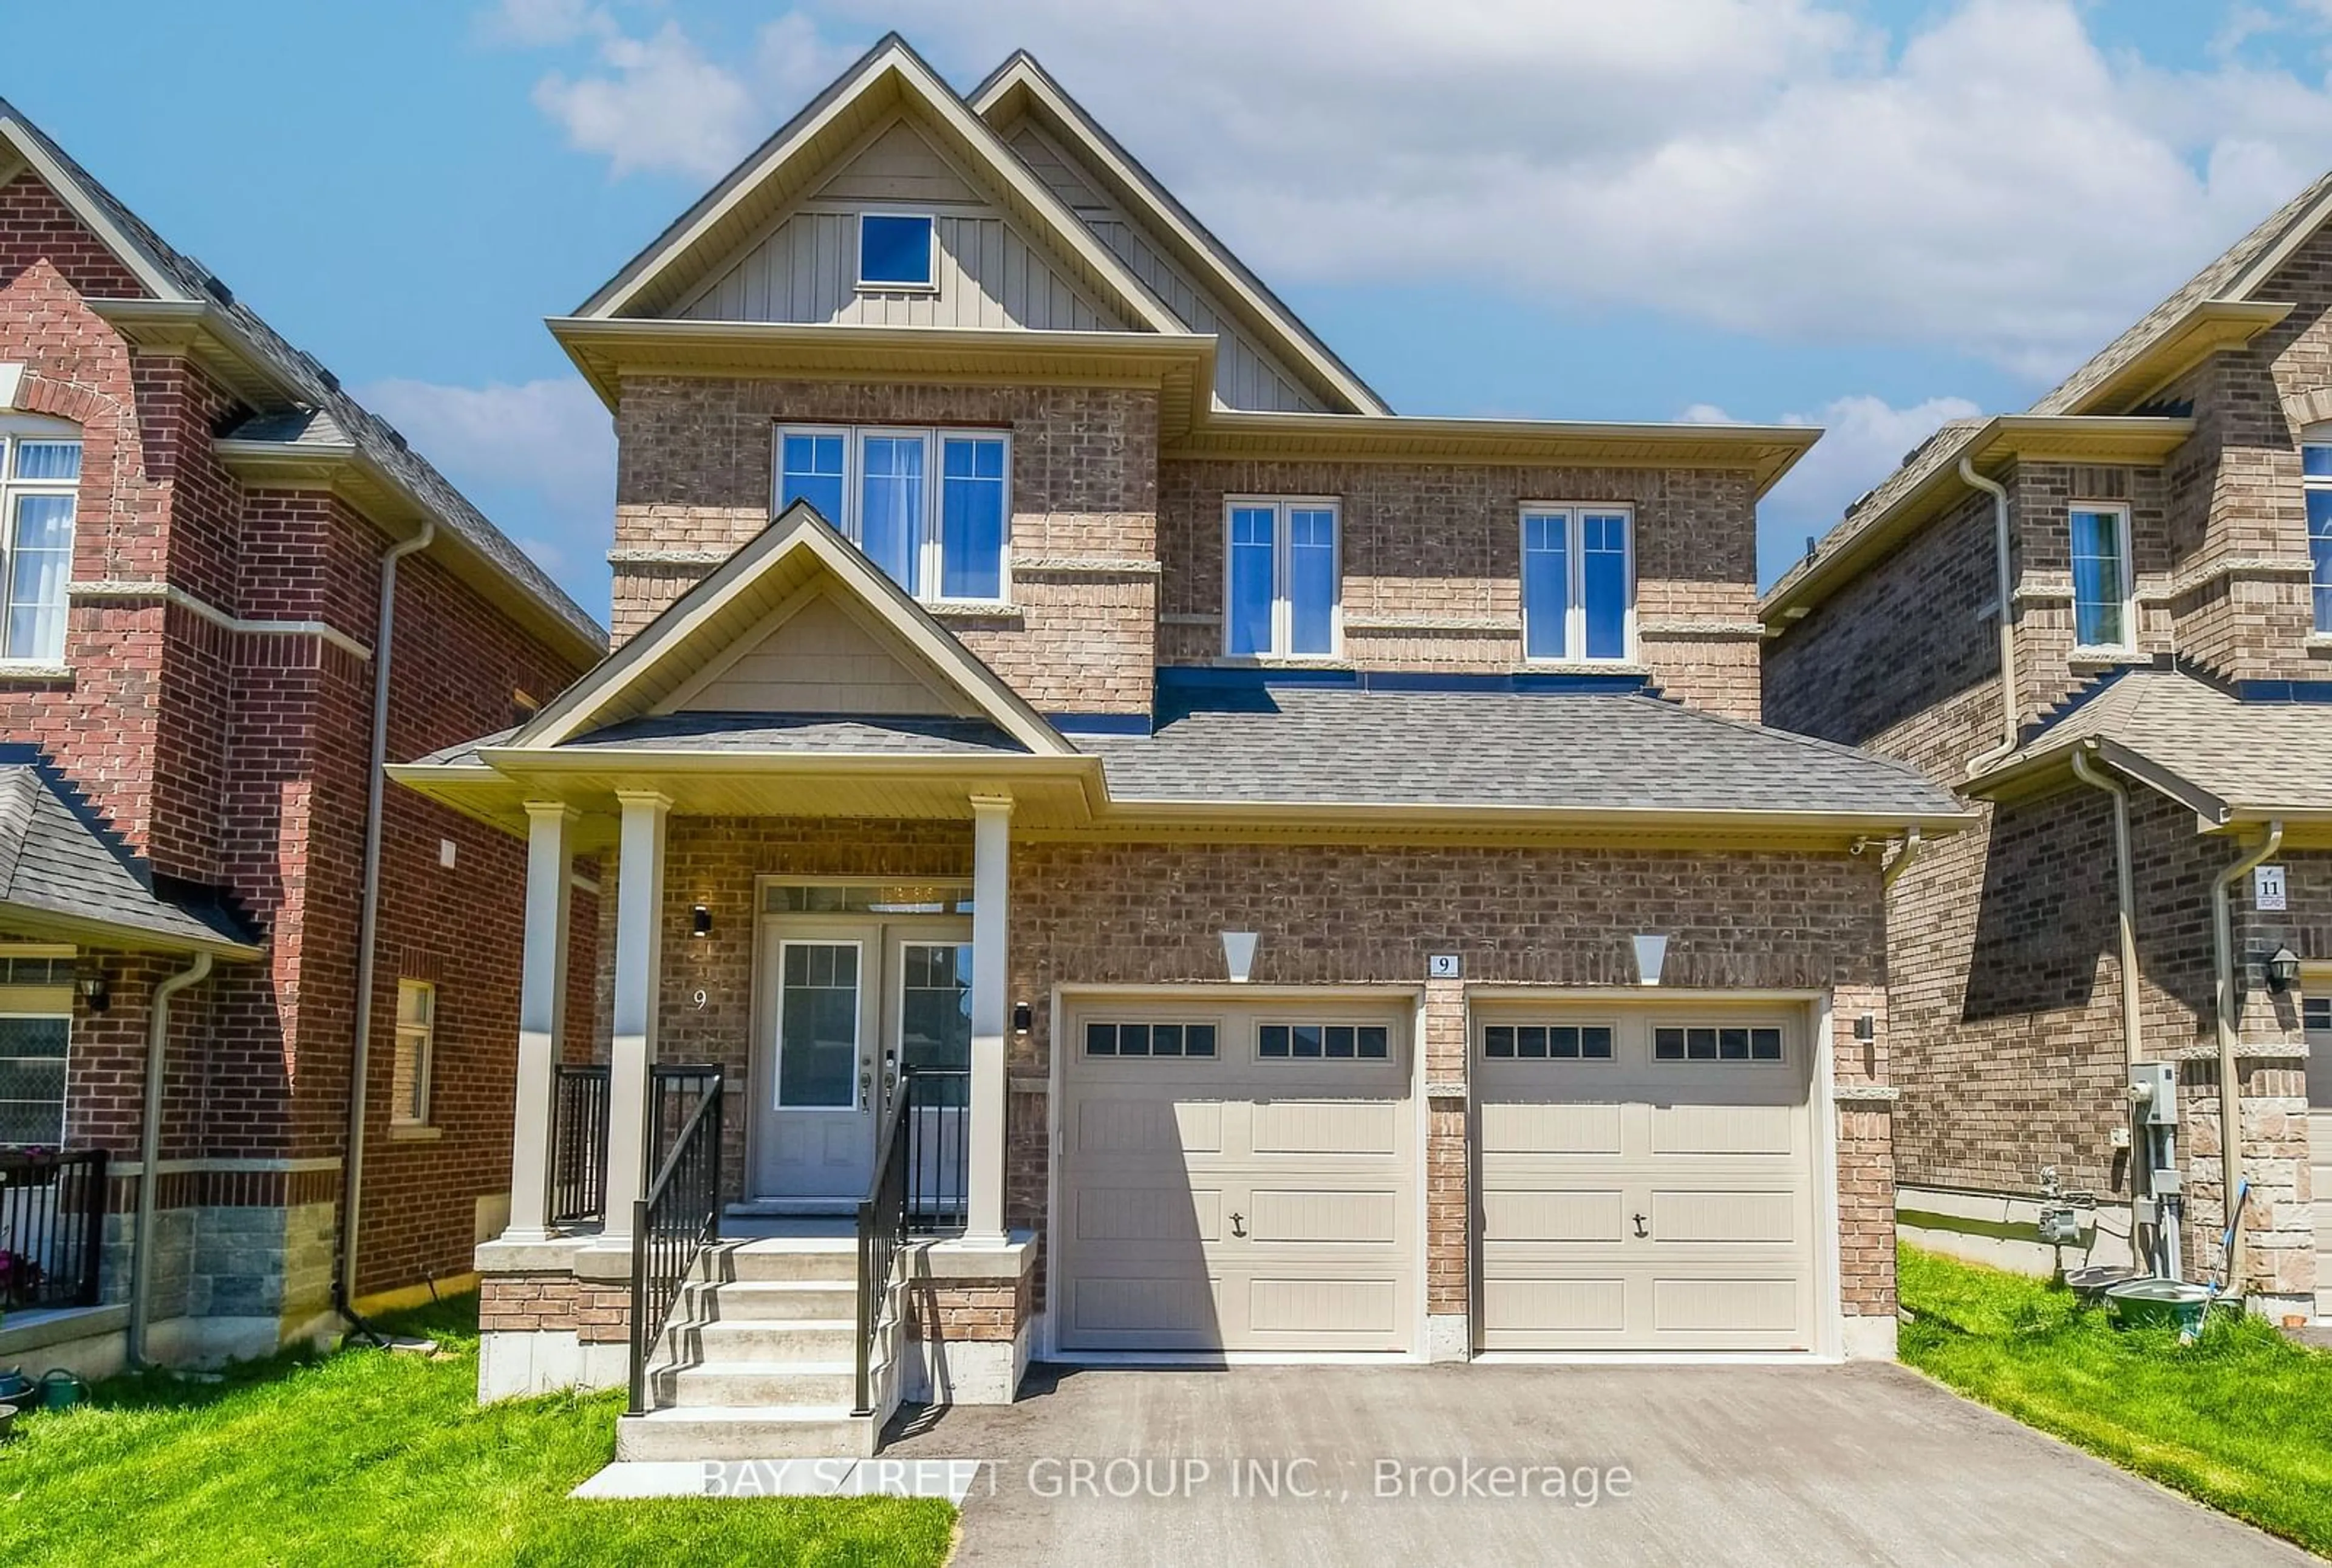 Home with brick exterior material for 9 Copperhill Hts, Barrie Ontario L9S 0K6